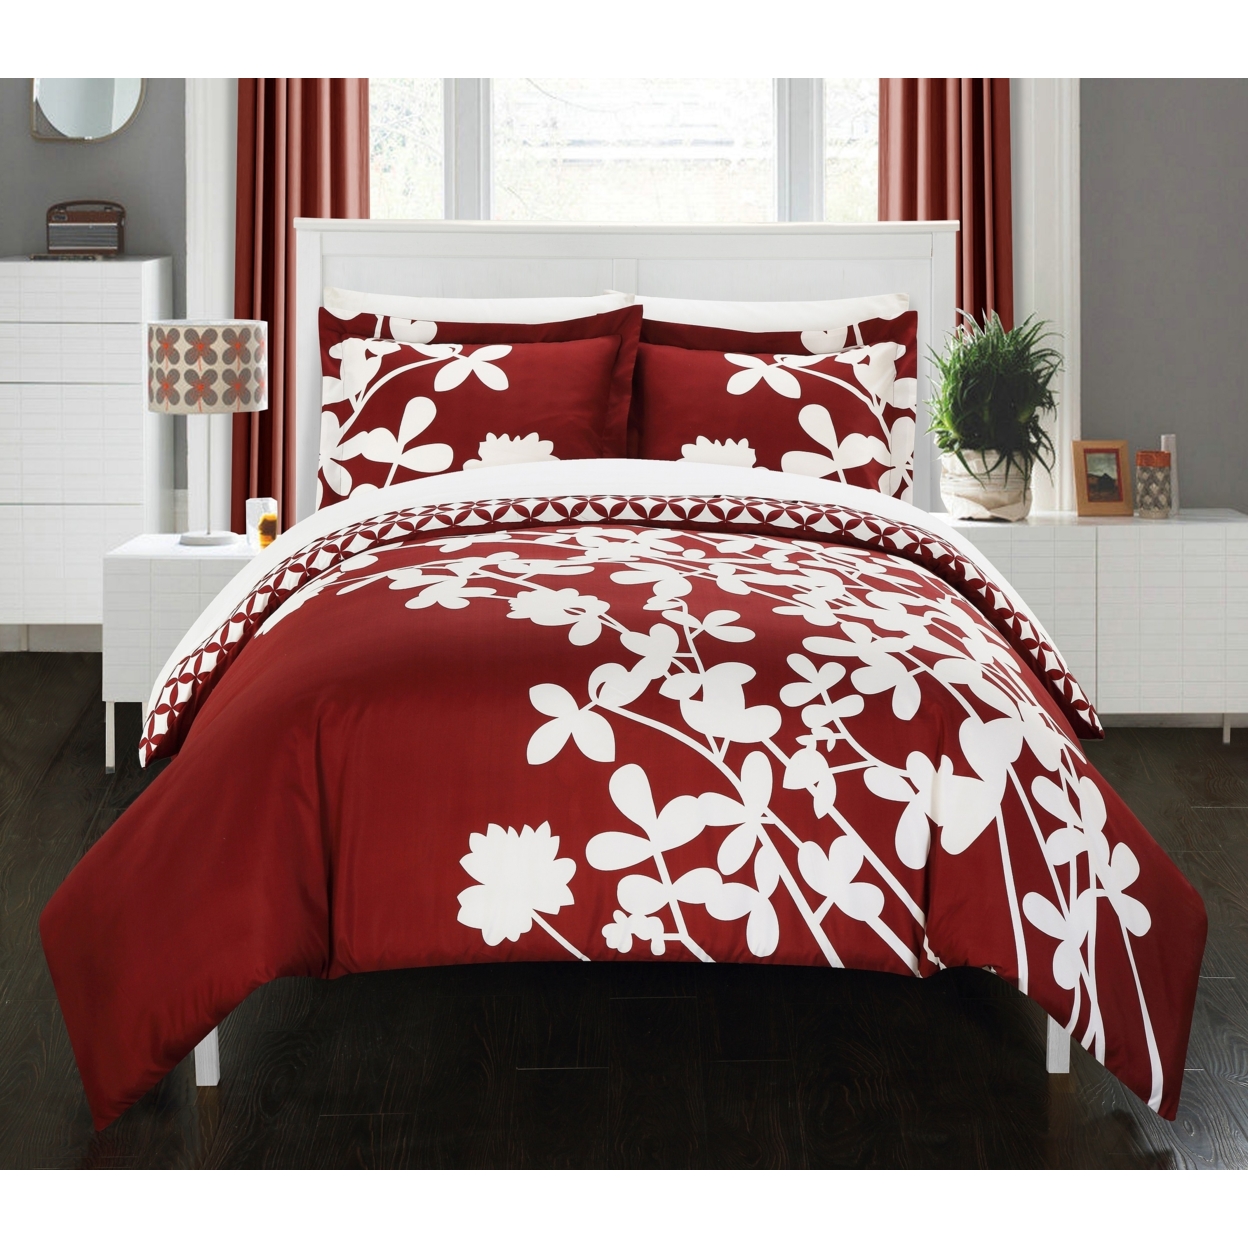 3 Piece Amaryllis Reversible Large Scale Floral Design Printed With Diamond Pattern Reverse Duvet Cover Set - Gray, Queen